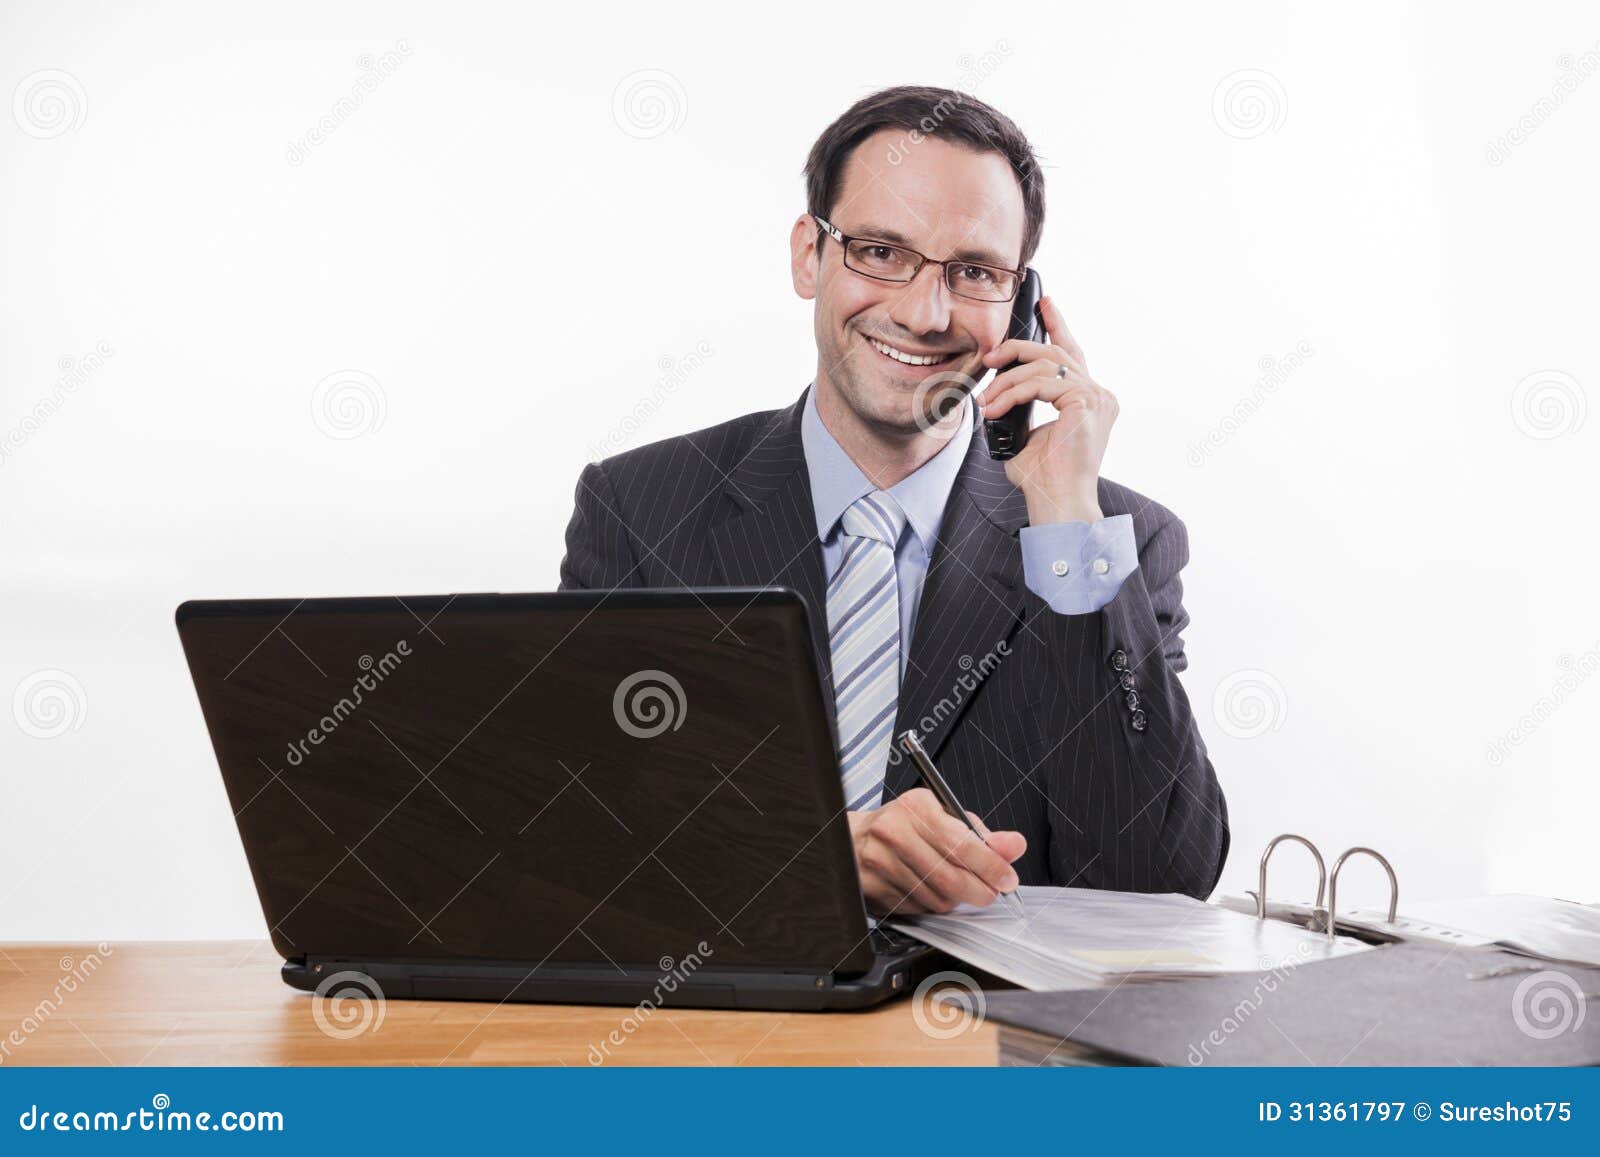 committed employee with glasses smiling at phone